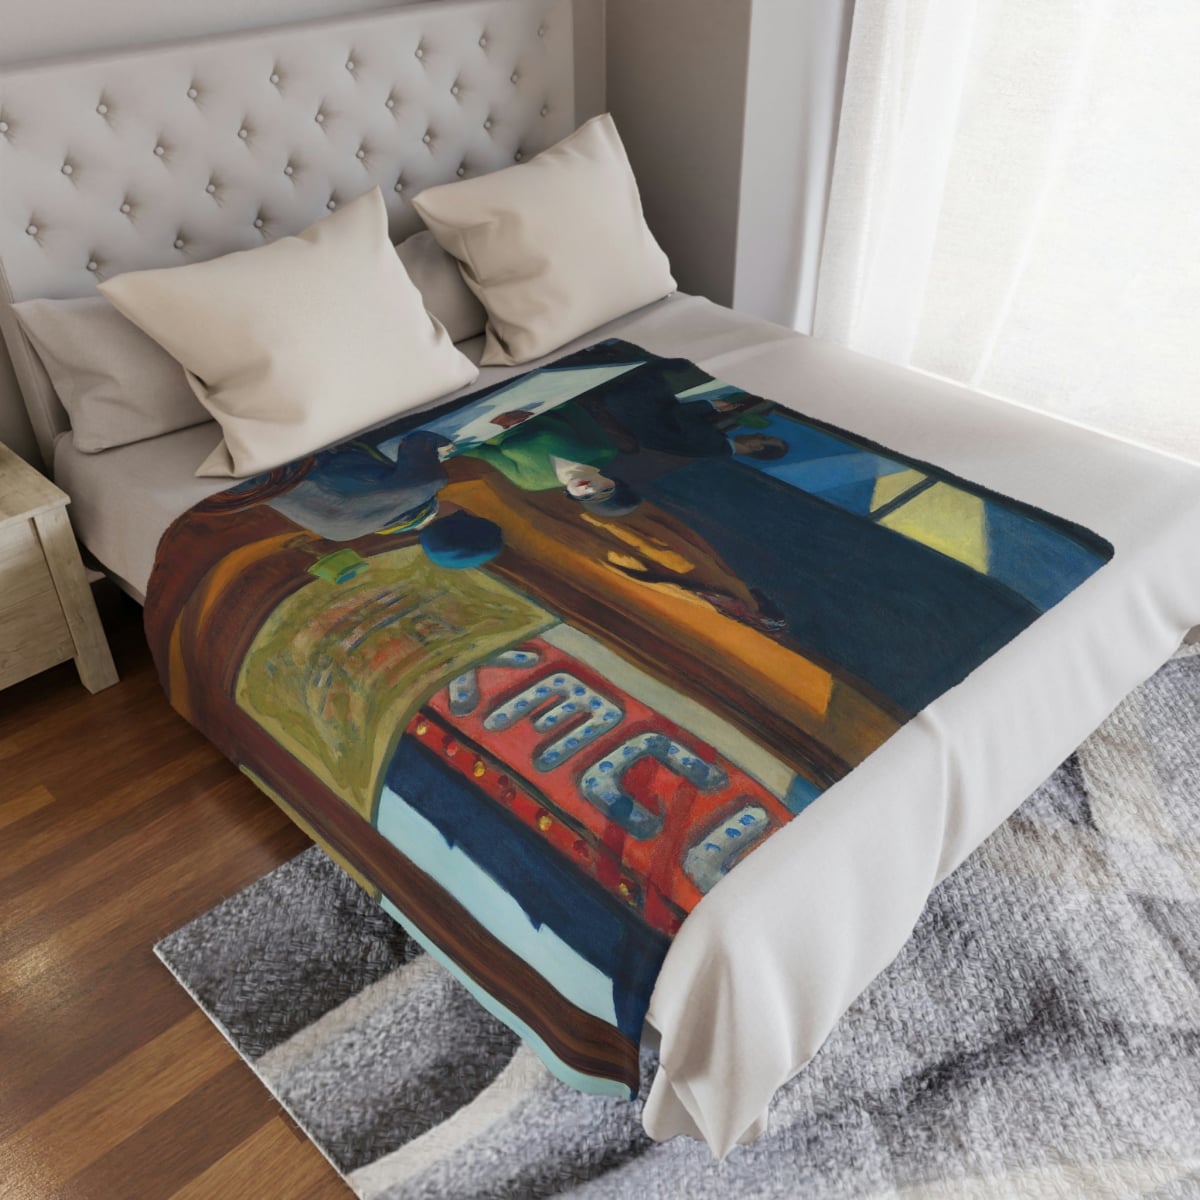 Experience the ultimate in luxury with the 'Chop Suey by Edward Hopper Art Blanket